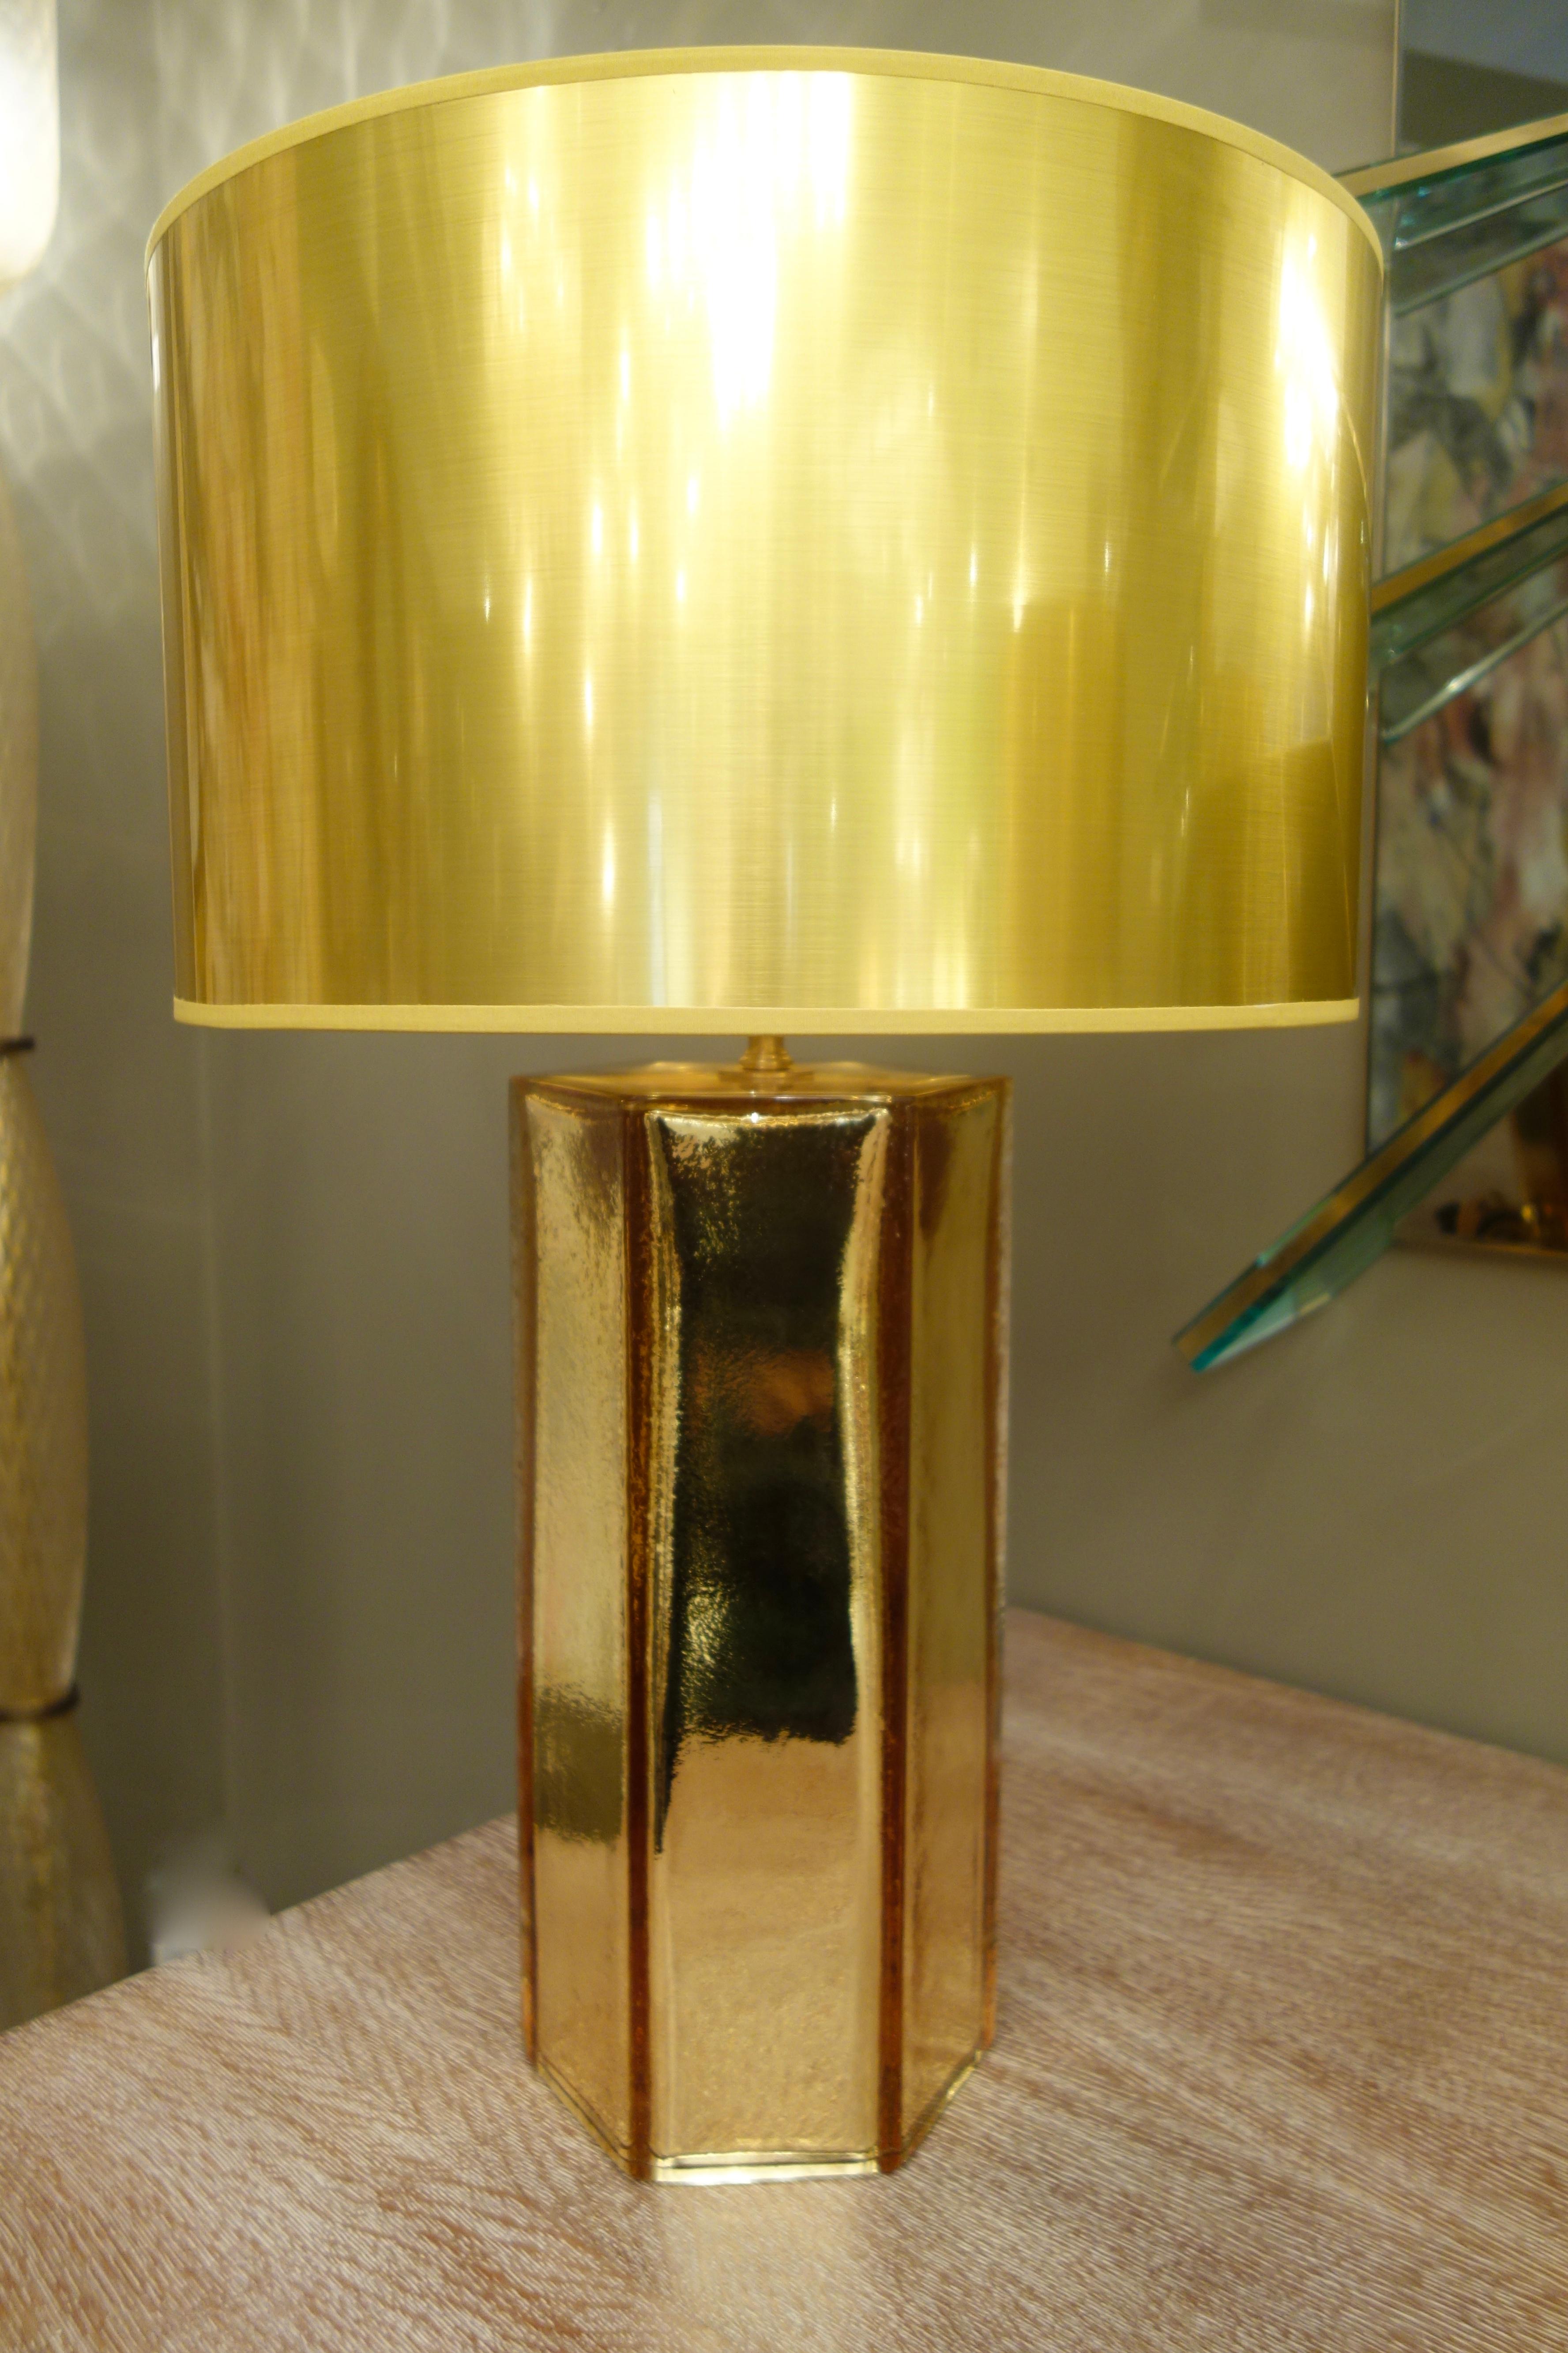 A pair of Italian gold hand blown Murano mercury glass cylindrical lamps with highly reflective broad, faceted surfaces signed by master glass maker, Alberto Donà. The imported French gold custom shades are included in the price.
The height as shown